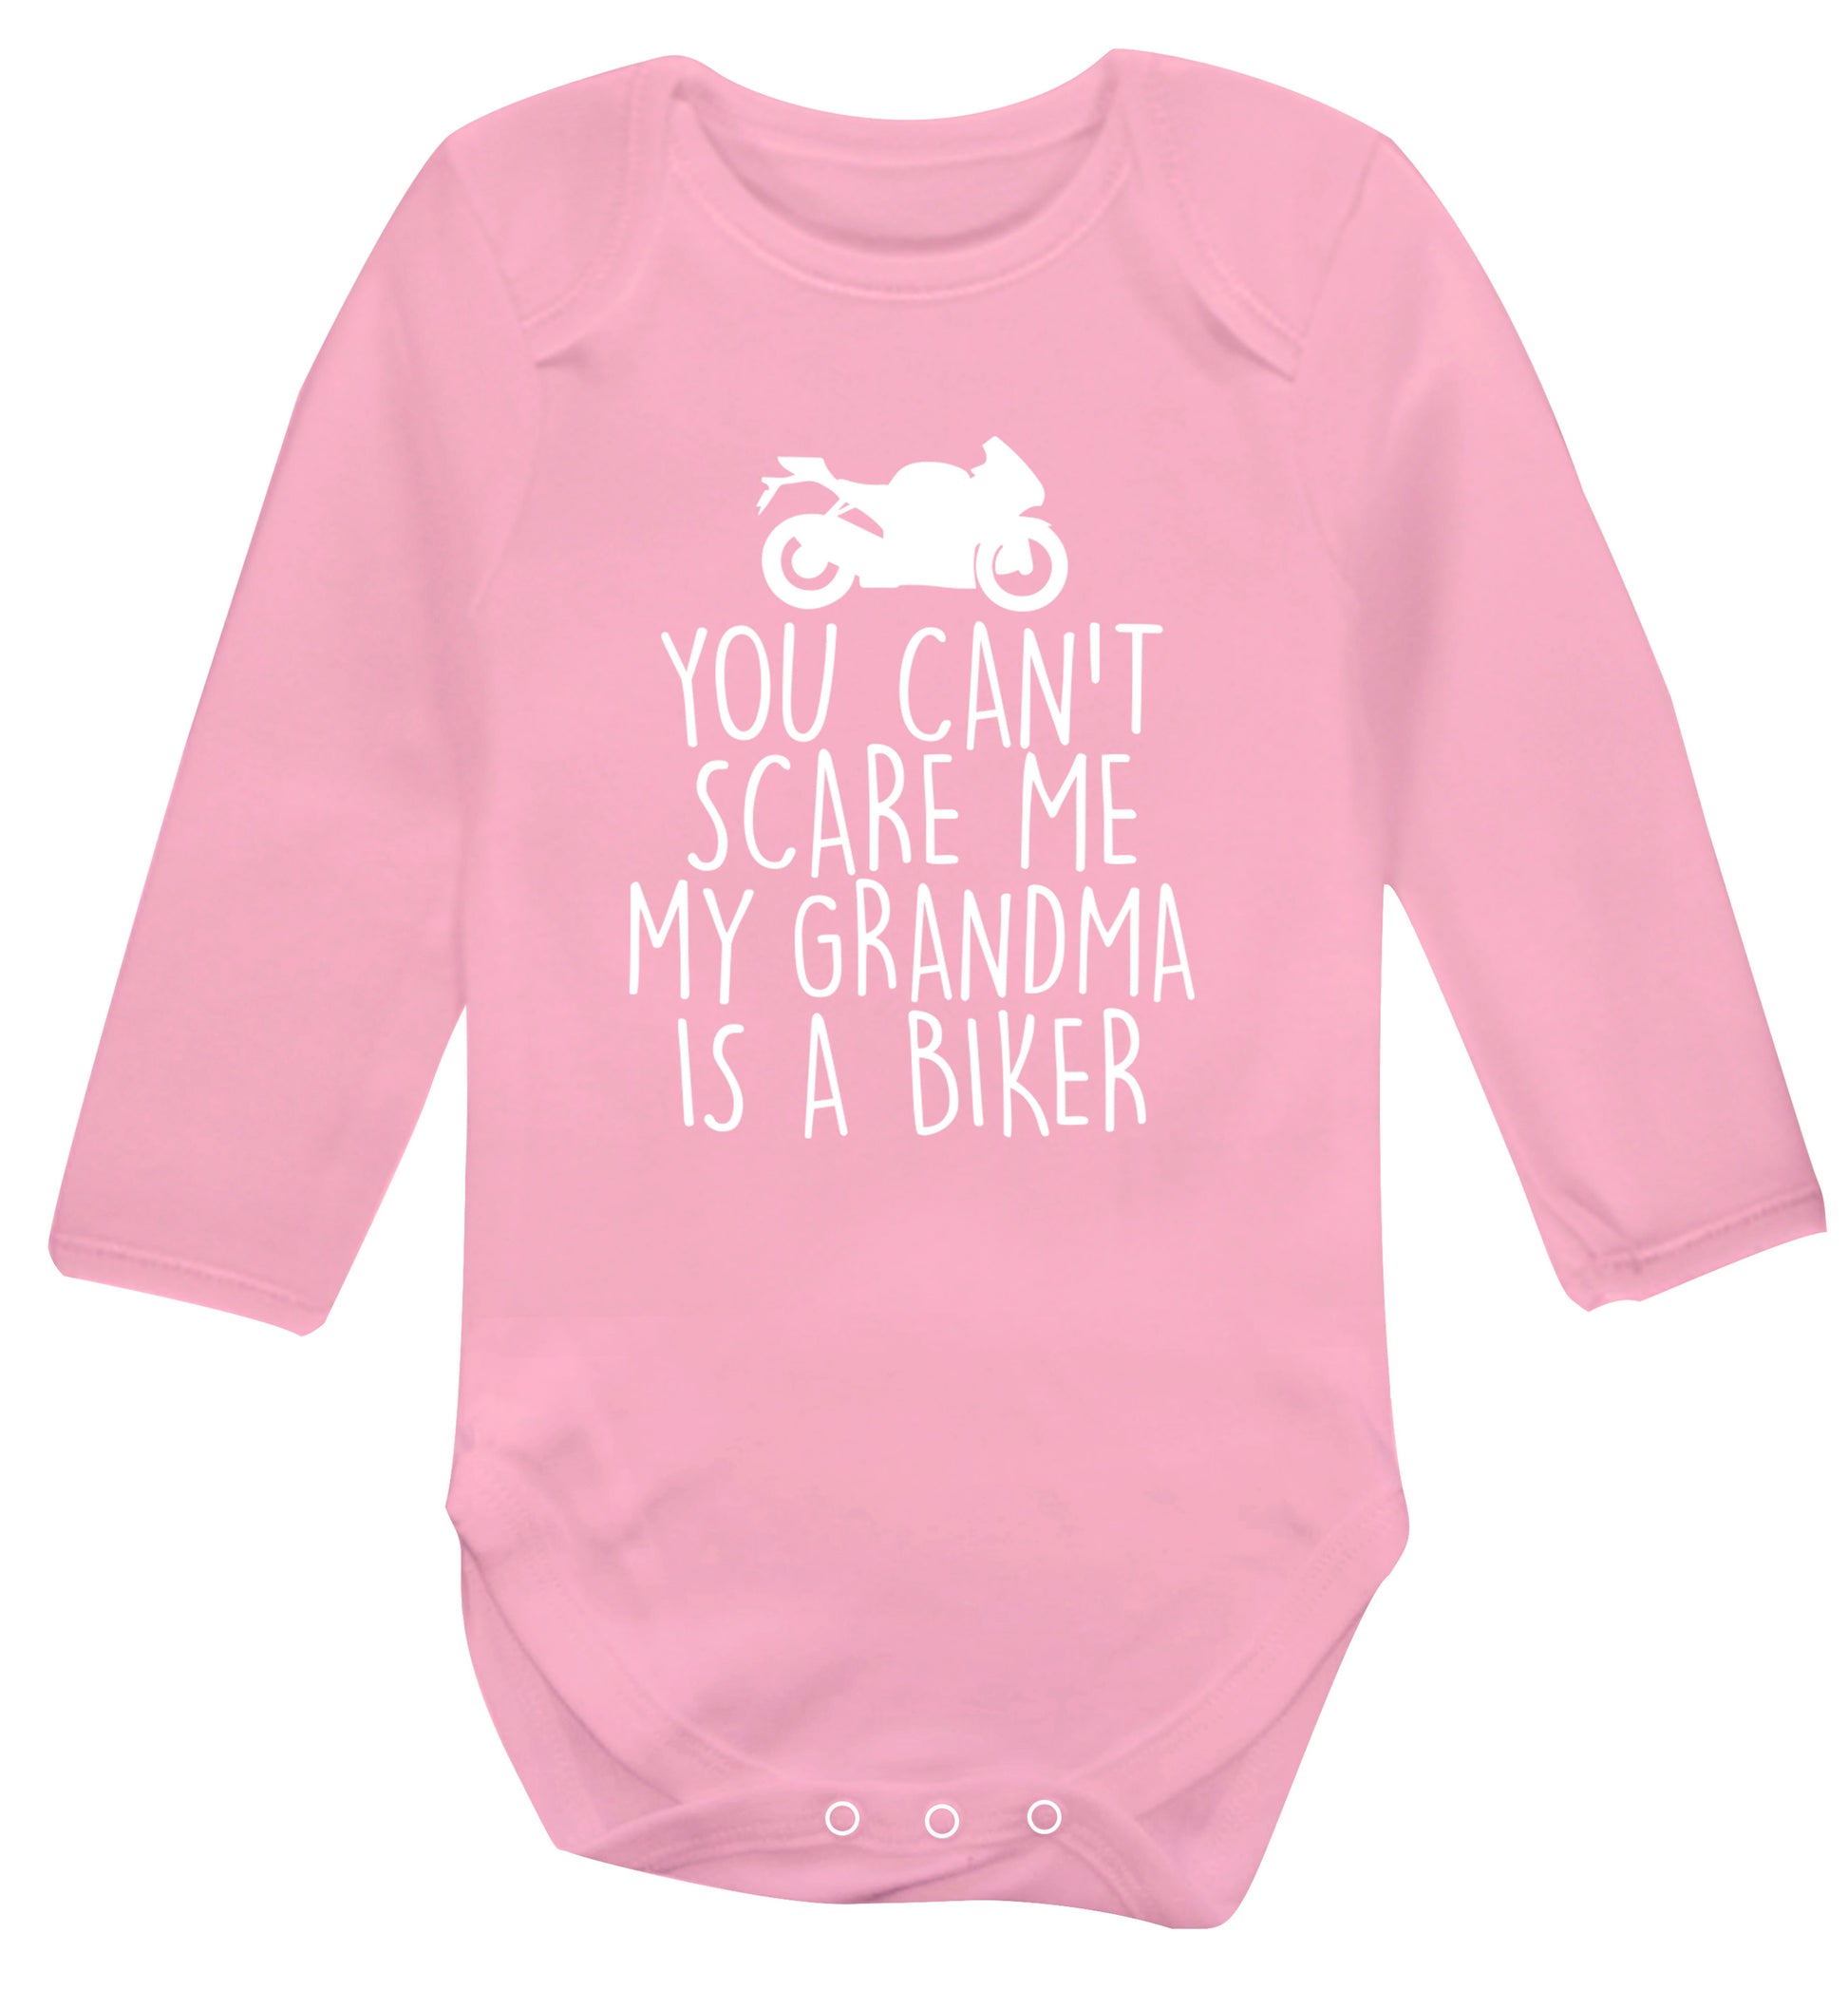 You can't scare me my grandma is a biker Baby Vest long sleeved pale pink 6-12 months